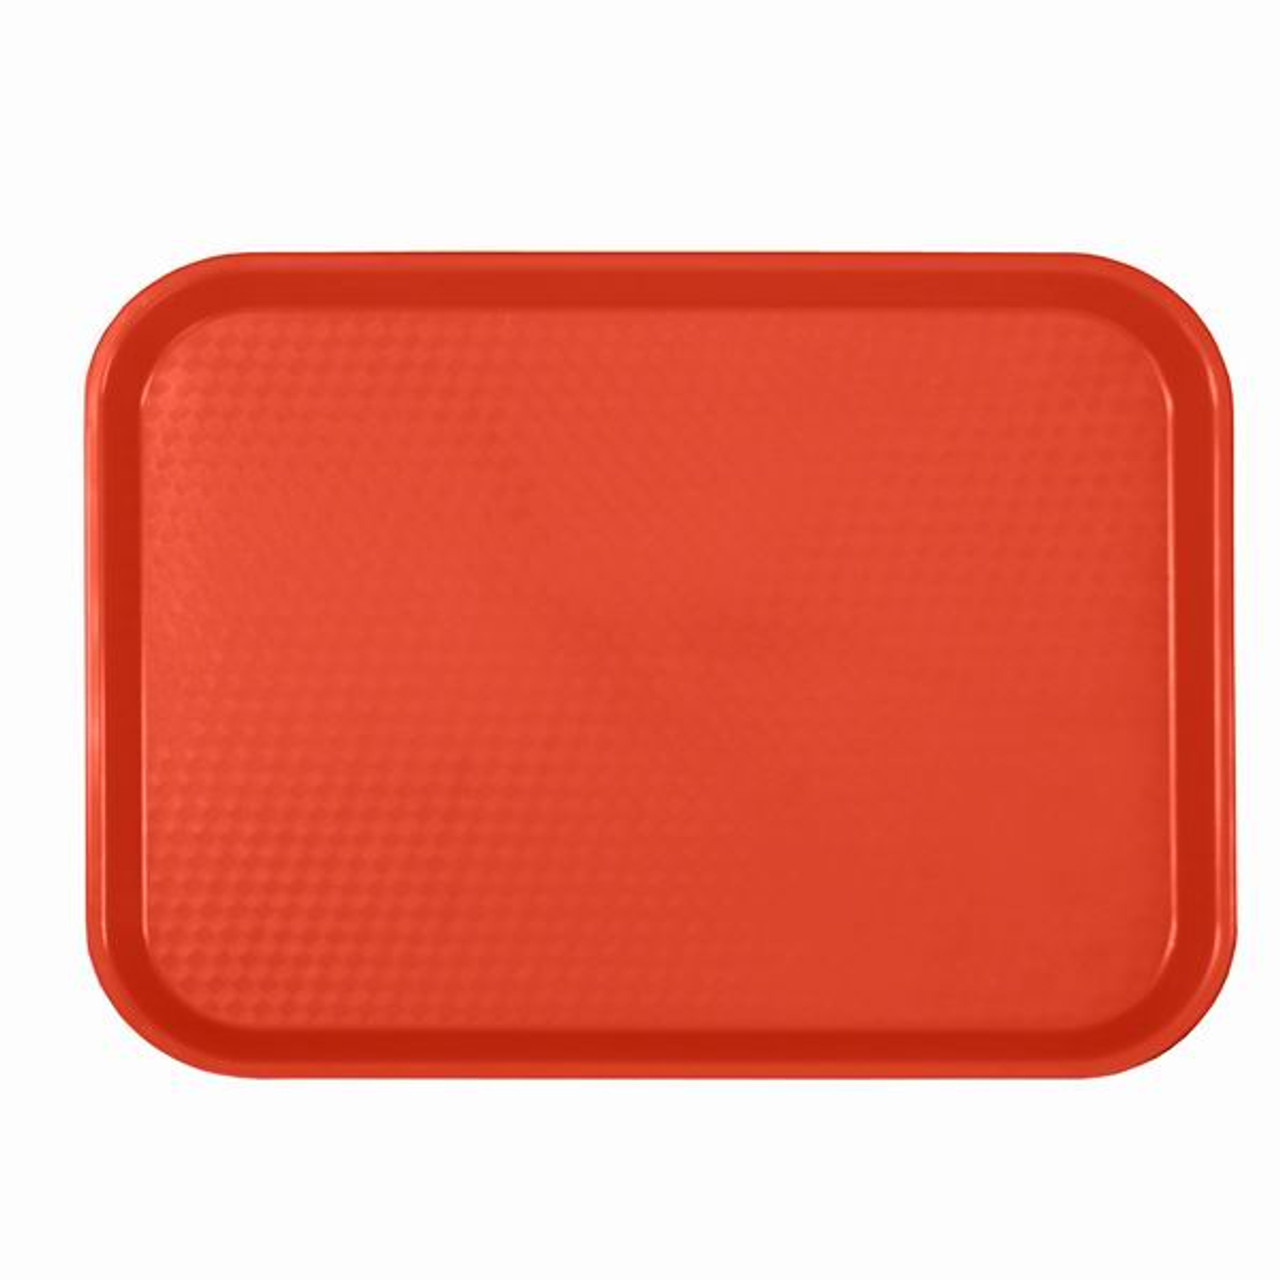 Thunder Group Fast Food Tray Rectangular Plastic Red|PLFFT1014RD